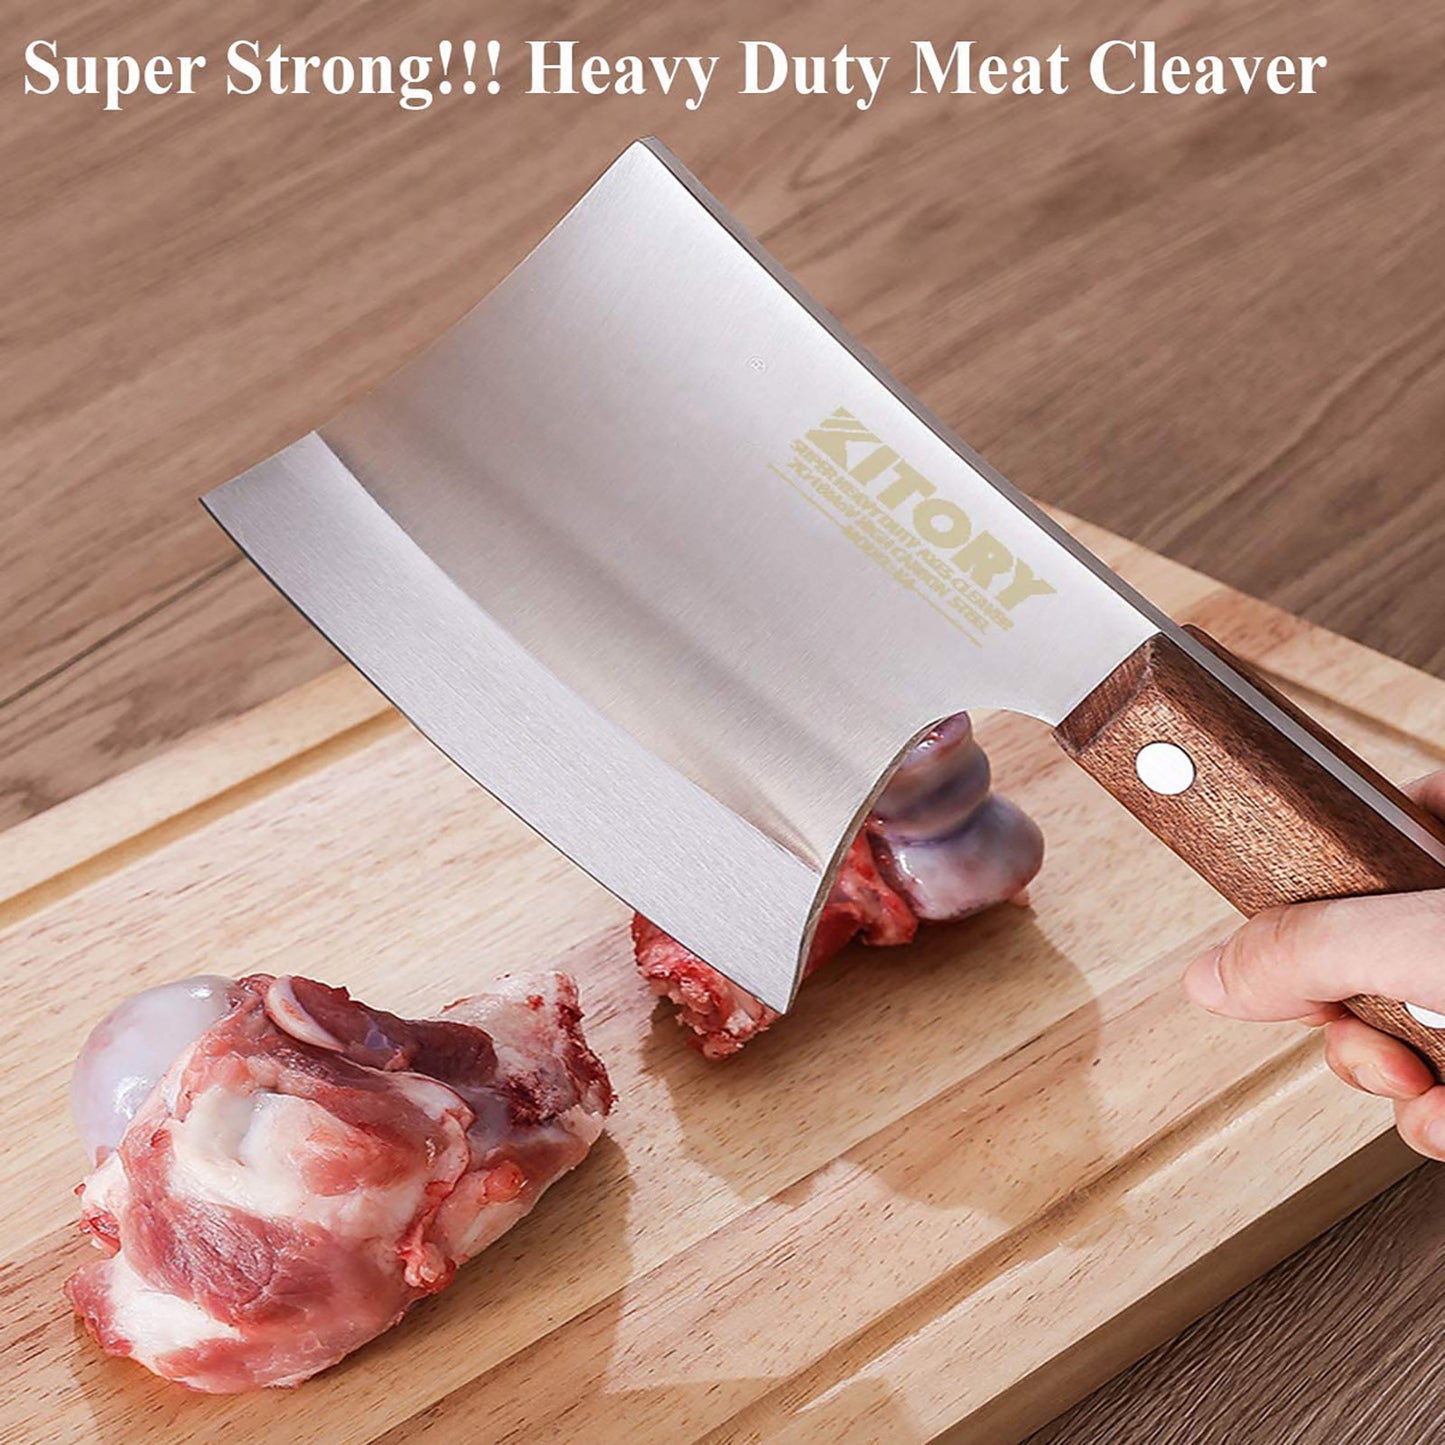 Kitory Heavy Duty Meat Cleaver Full Tang Wooden Handle